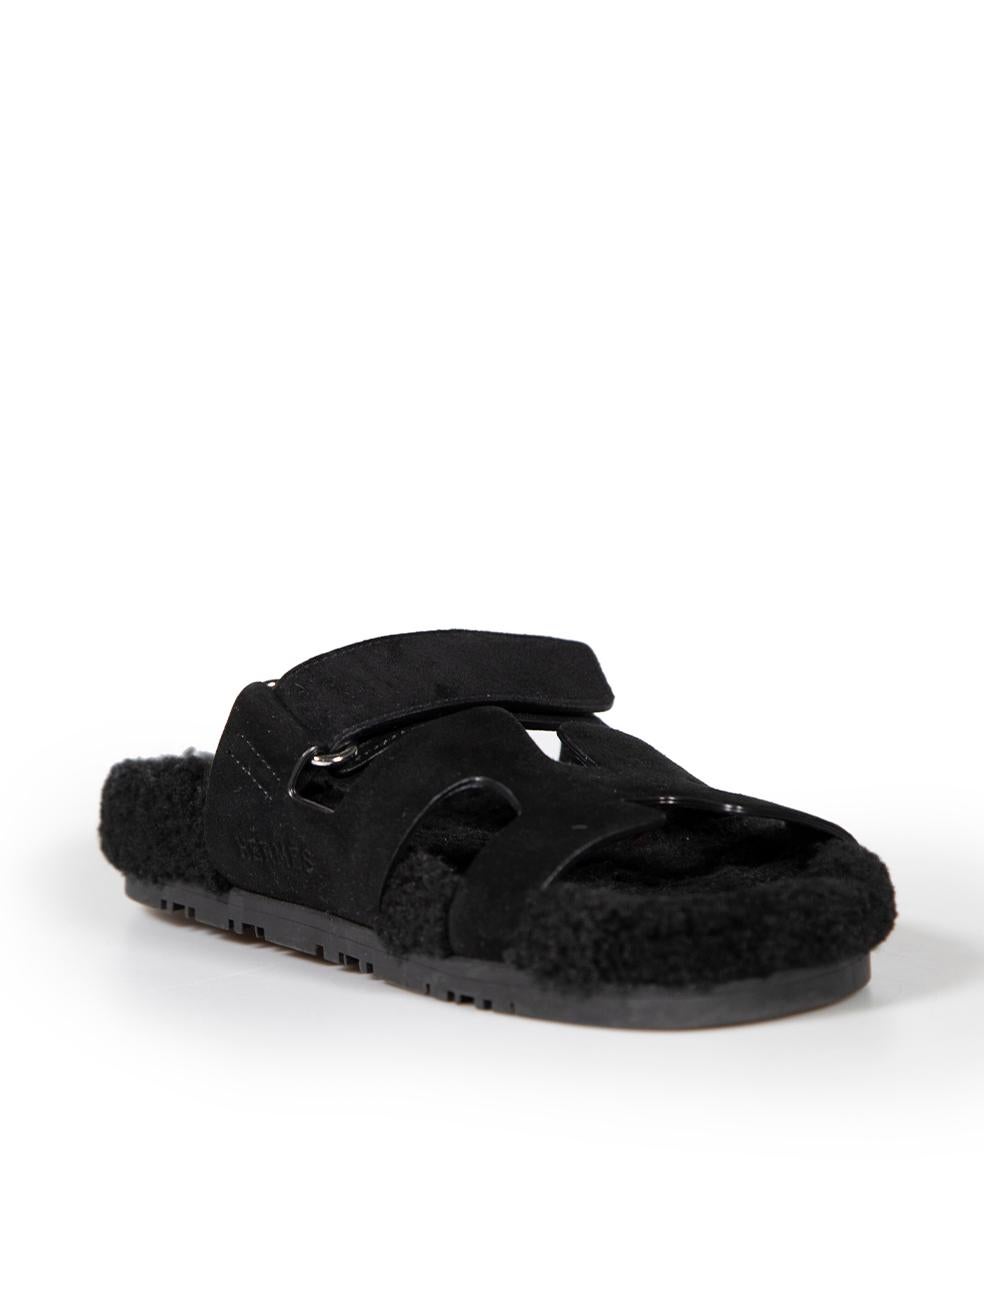 CONDITION is Good. General wear to sandals is evident. Moderate signs of wear to the shearling footbed with some noticeable spots of compression and abrasion seen throughout. Mild scuffing is also found through the outsole on this used Hermès